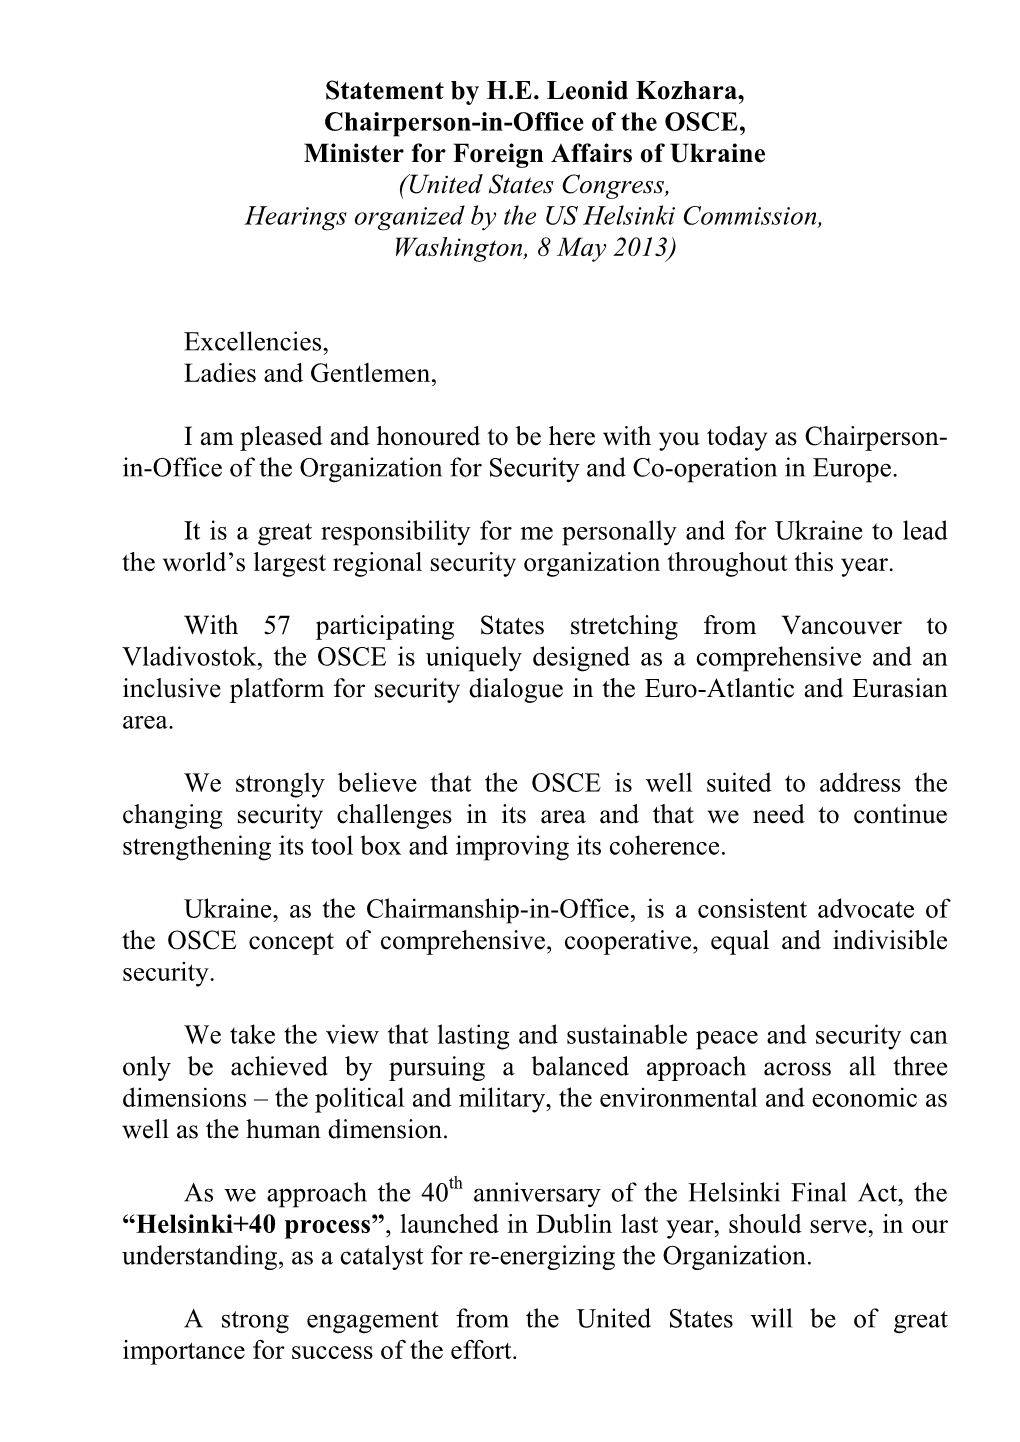 Statement by His Excellency Leonid Kozhara